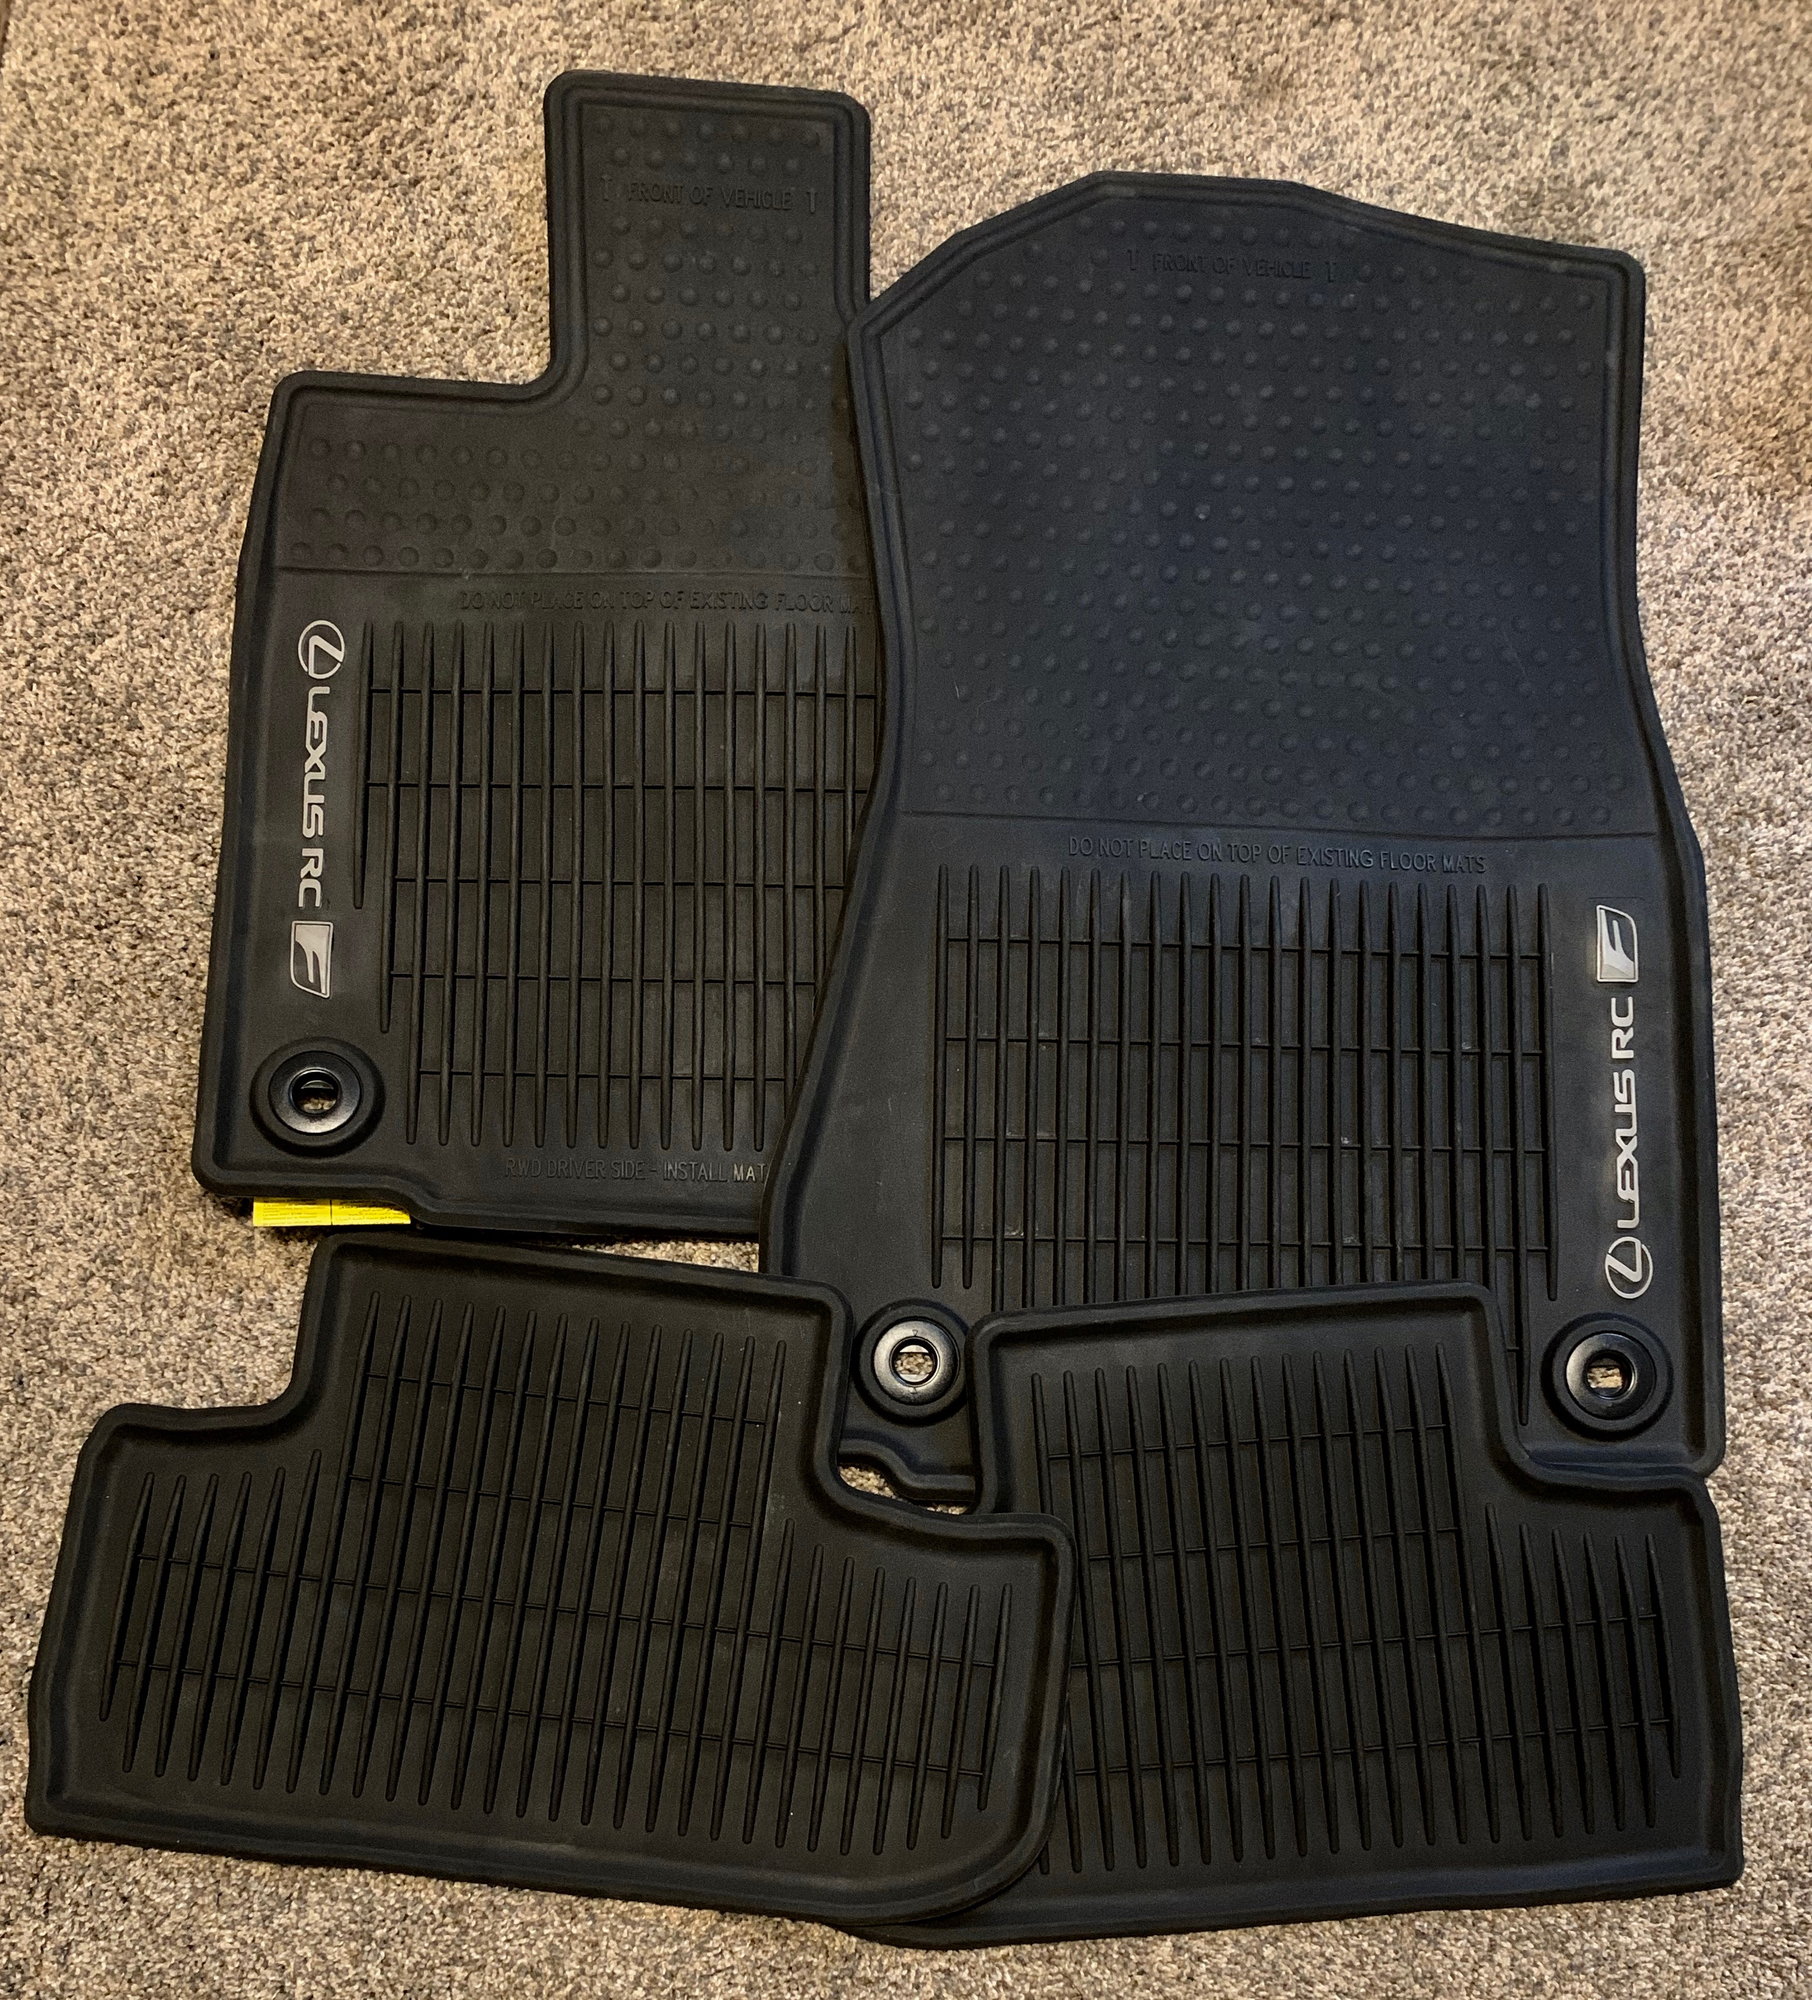 Interior/Upholstery - OEM Lexus RC F All Season Rubber Floor Mats - New - 2015 to 2019 Lexus RC F - Denver, CO 80221, United States